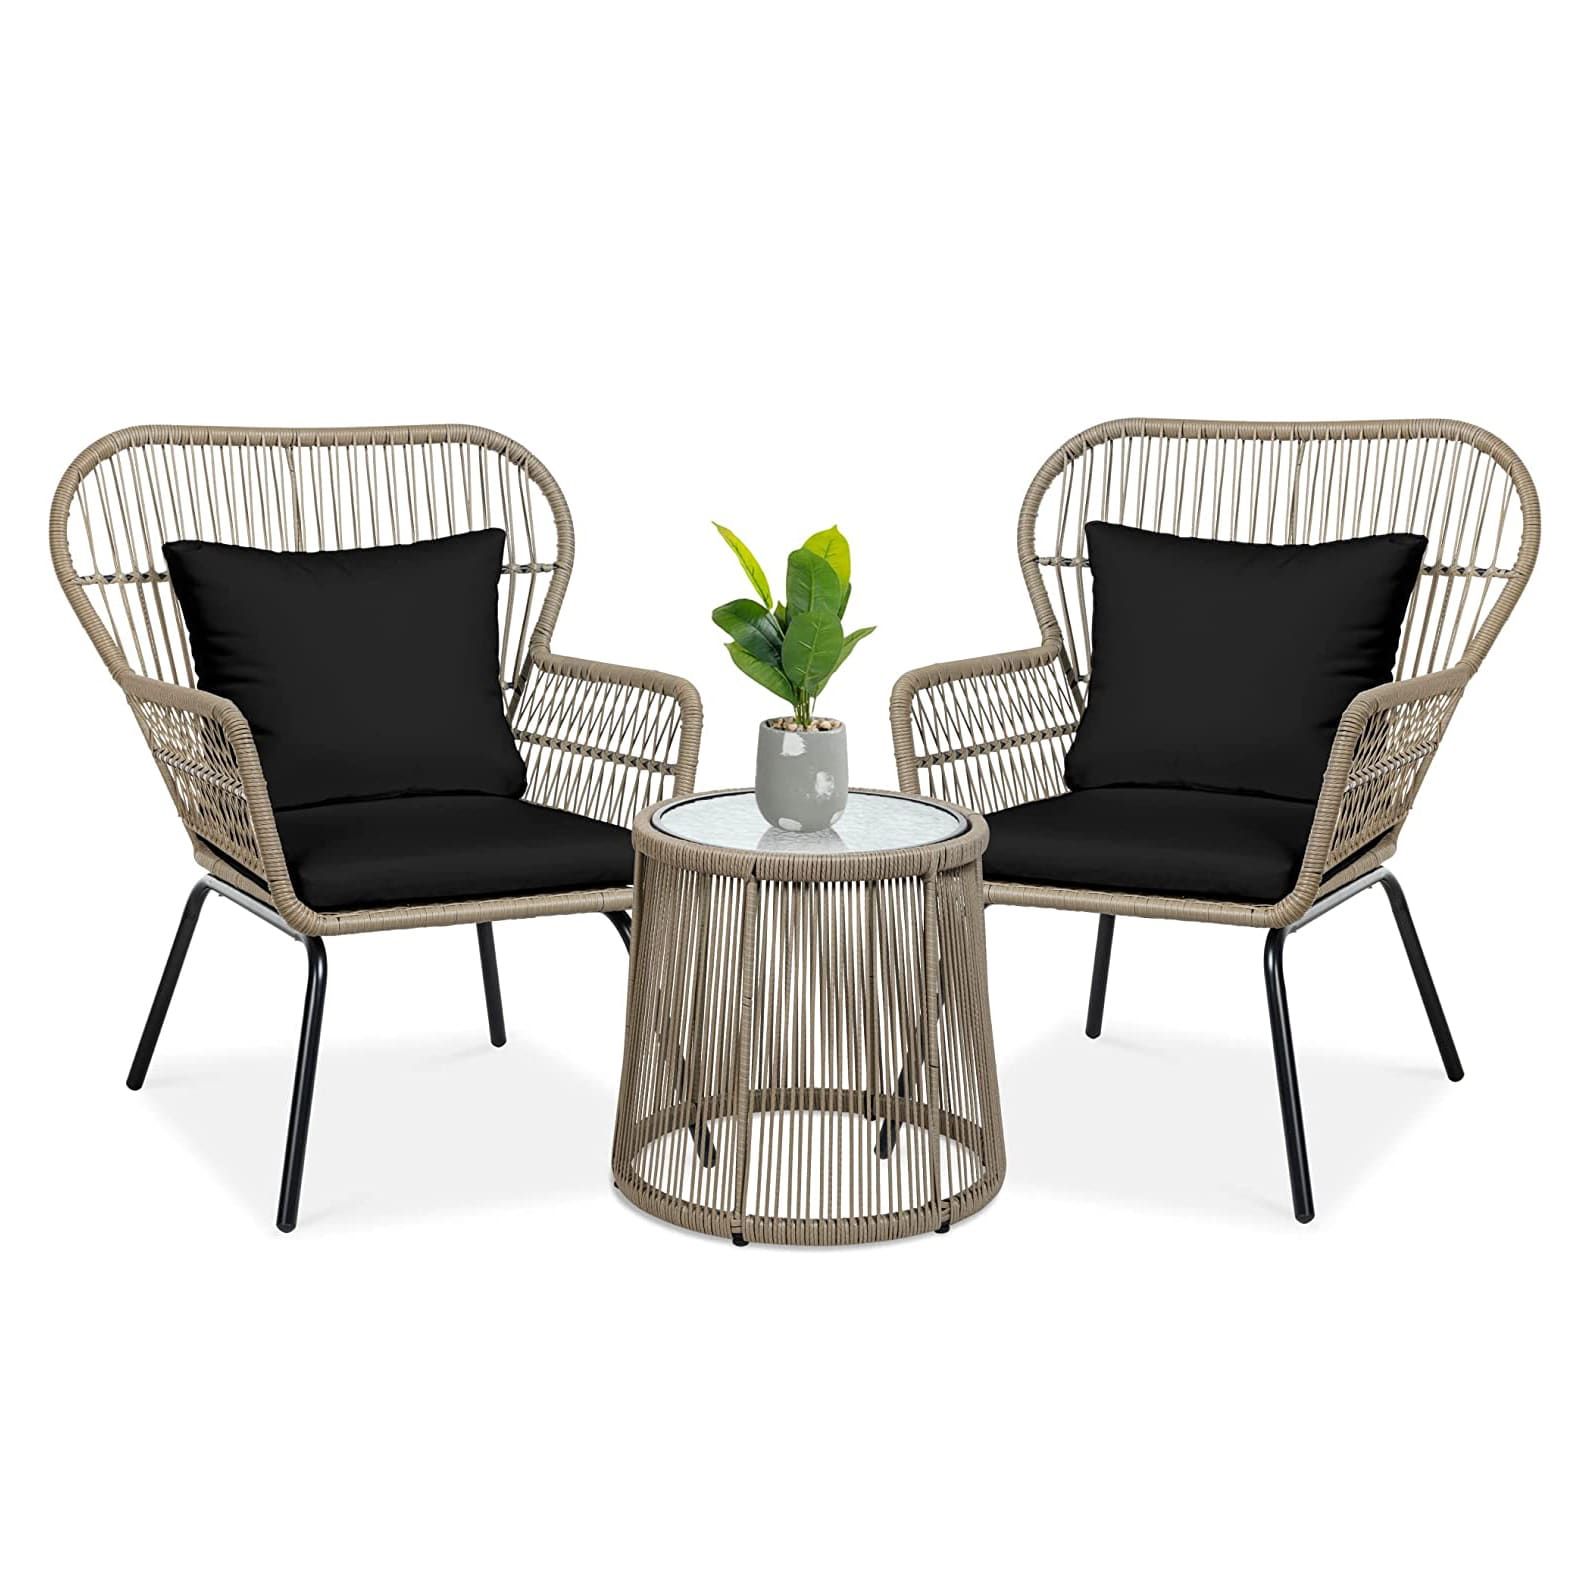 11 Best Small Space Outdoor Furniture Sets For Patios And Balconies 2023 |  Apartment Therapy Pertaining To Patio Furniture Wicker Outdoor Bistro Set (View 10 of 15)